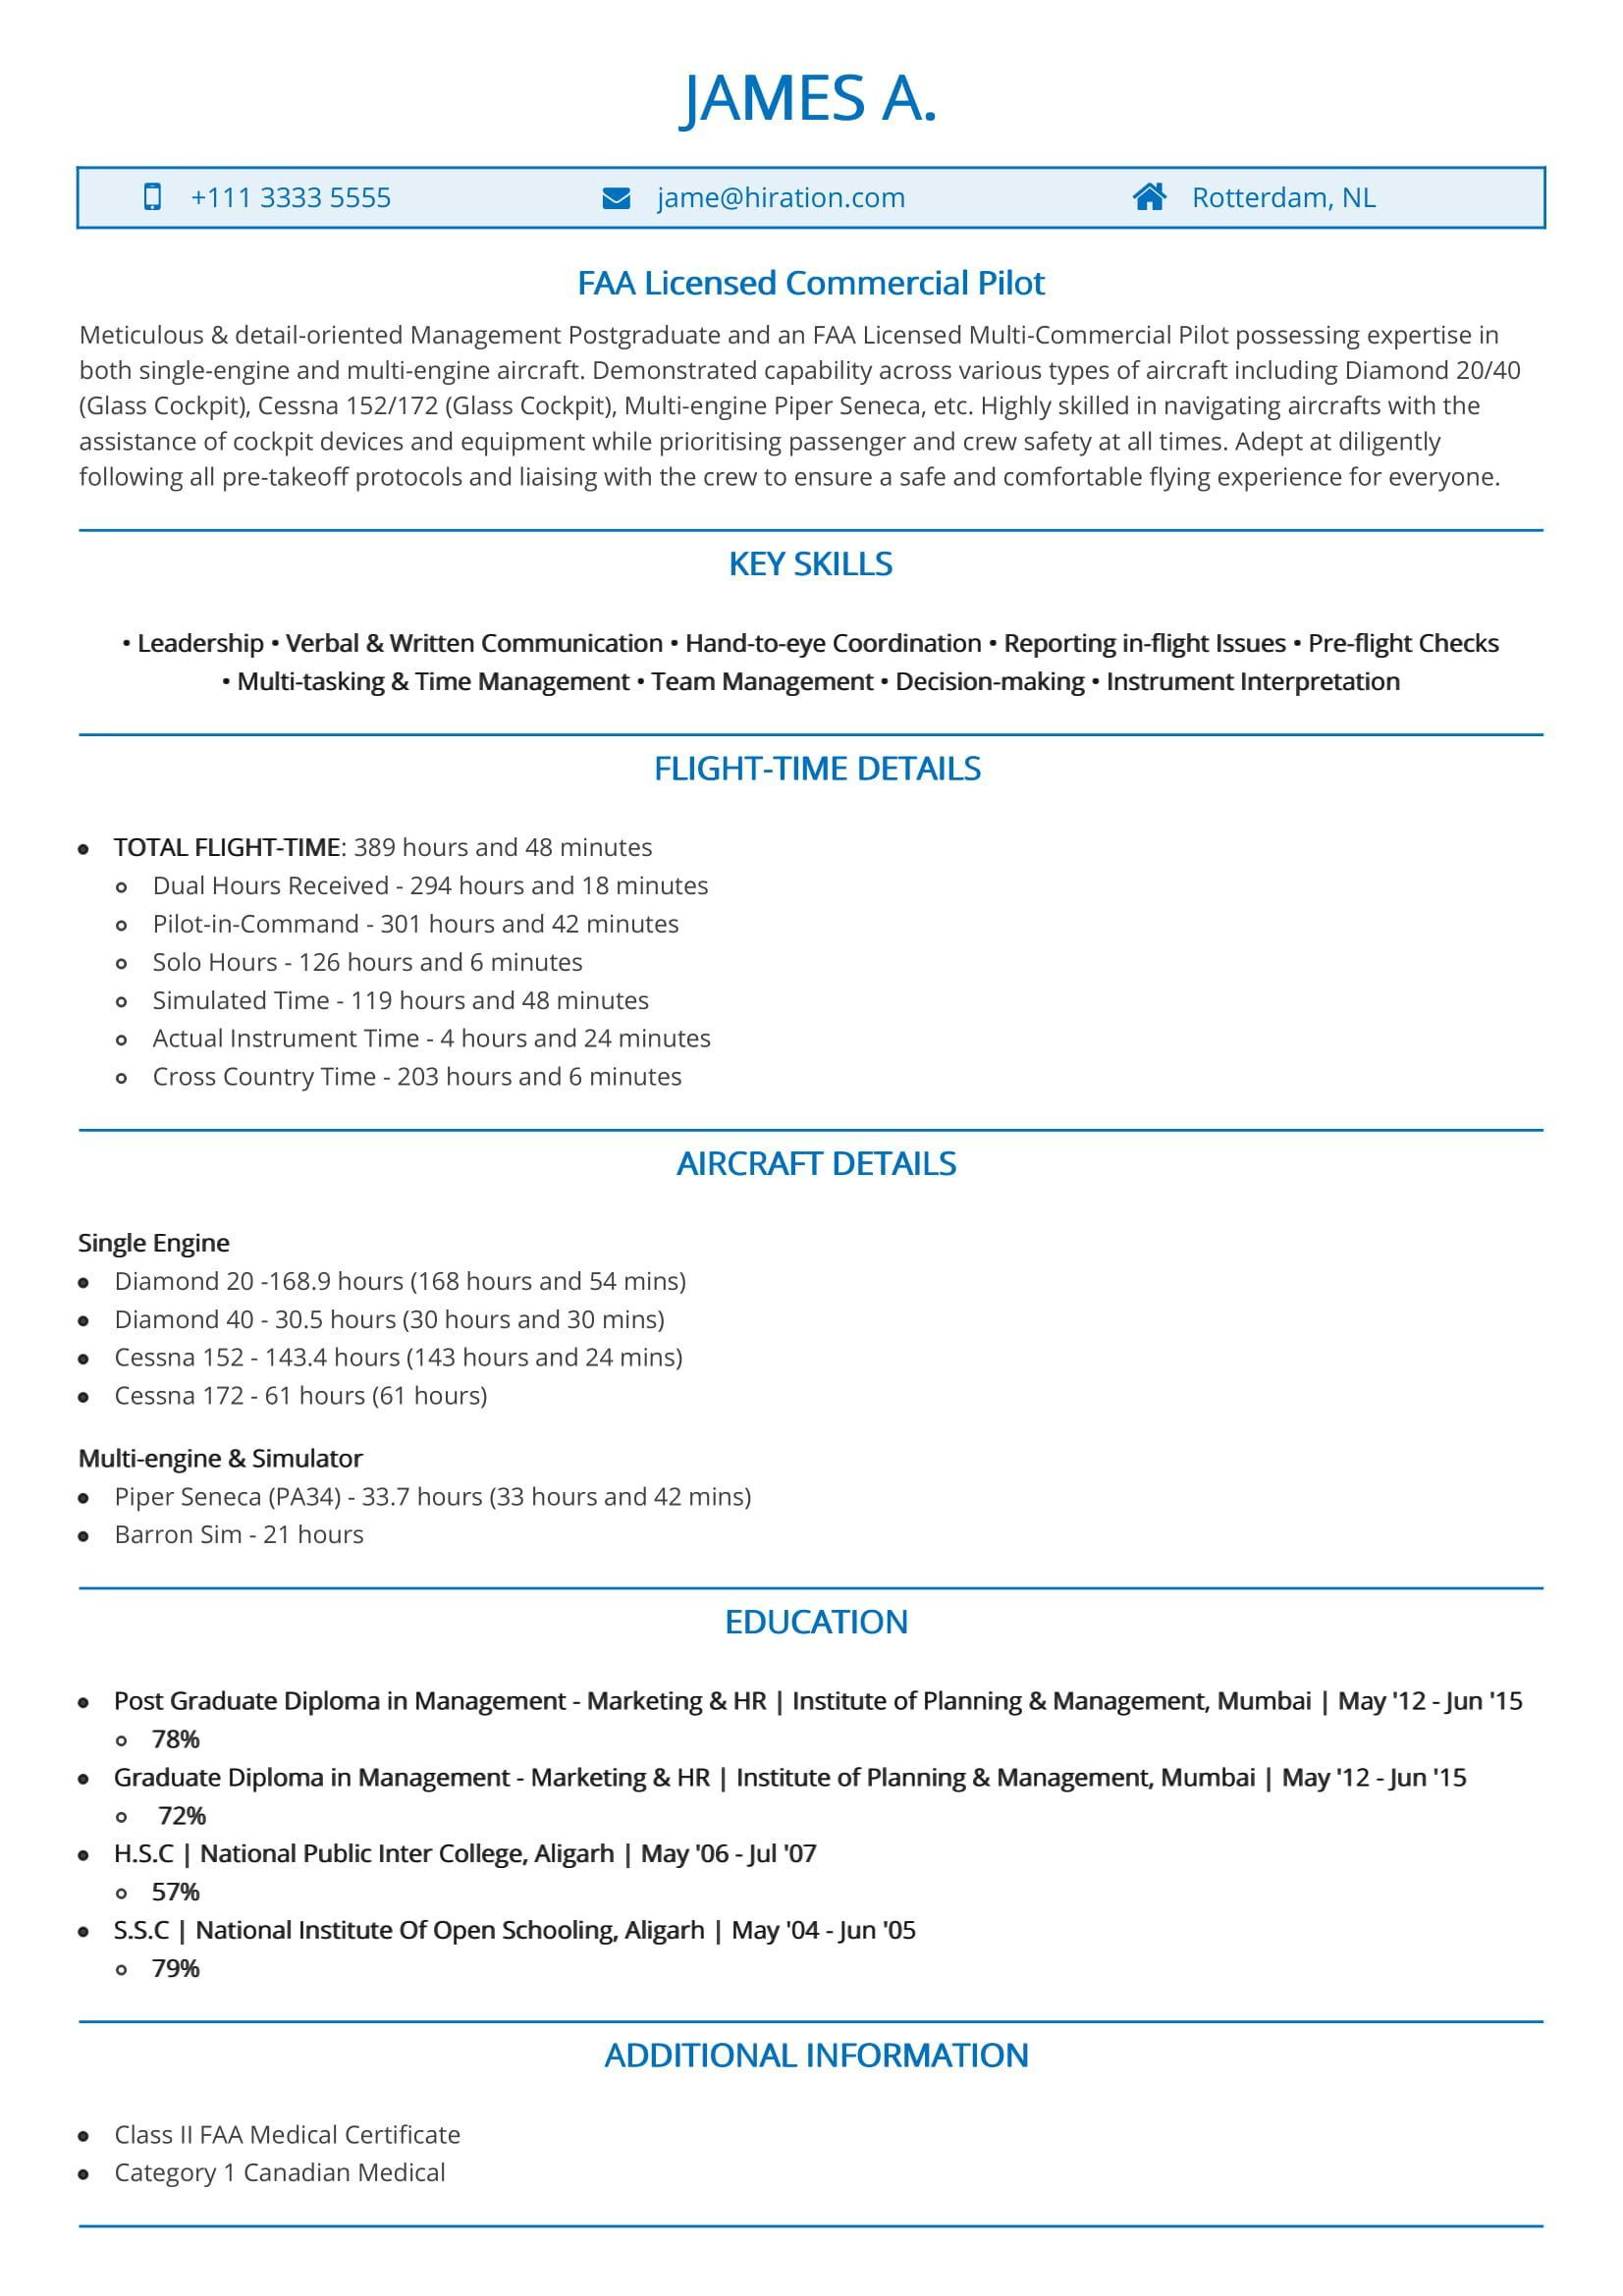 First Time Resume with No Work Experience Samples How to Write A Resume with No Experience: Writing Your First Resume